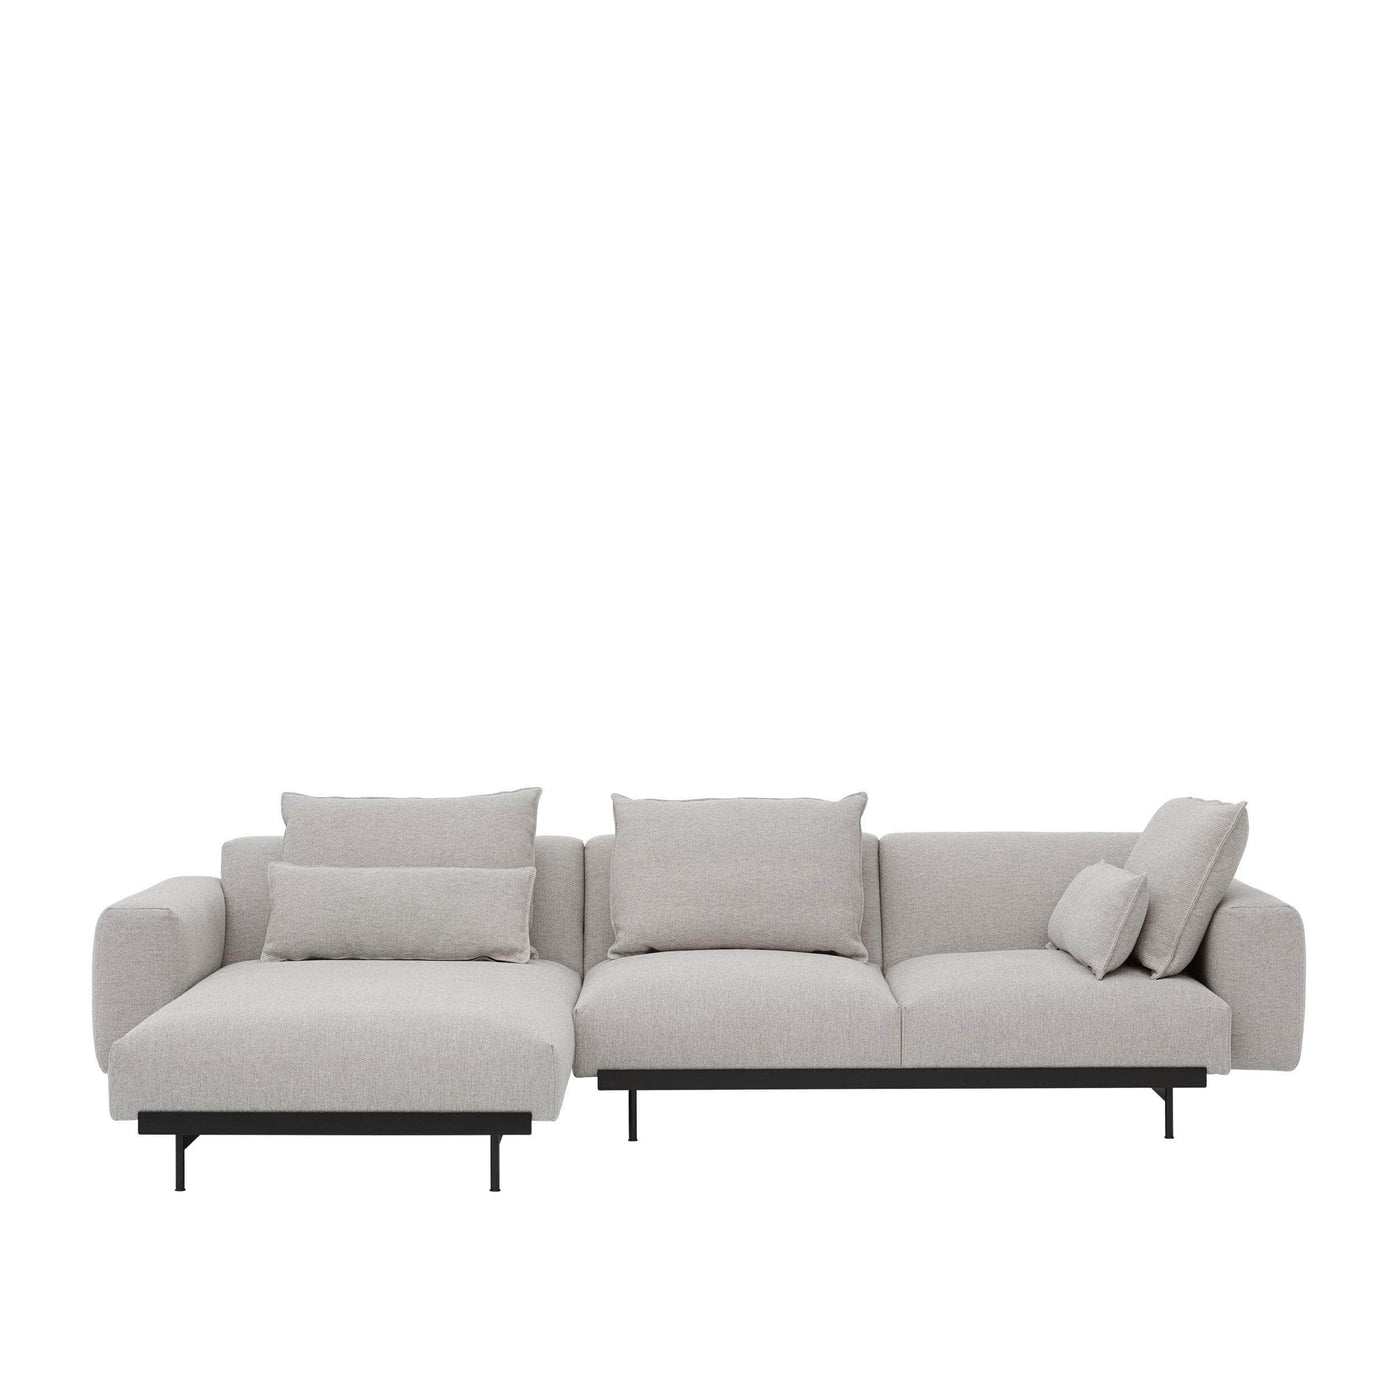 Muuto In Situ 3 Seater Sofa in Clay 12. Shop now at someday designs